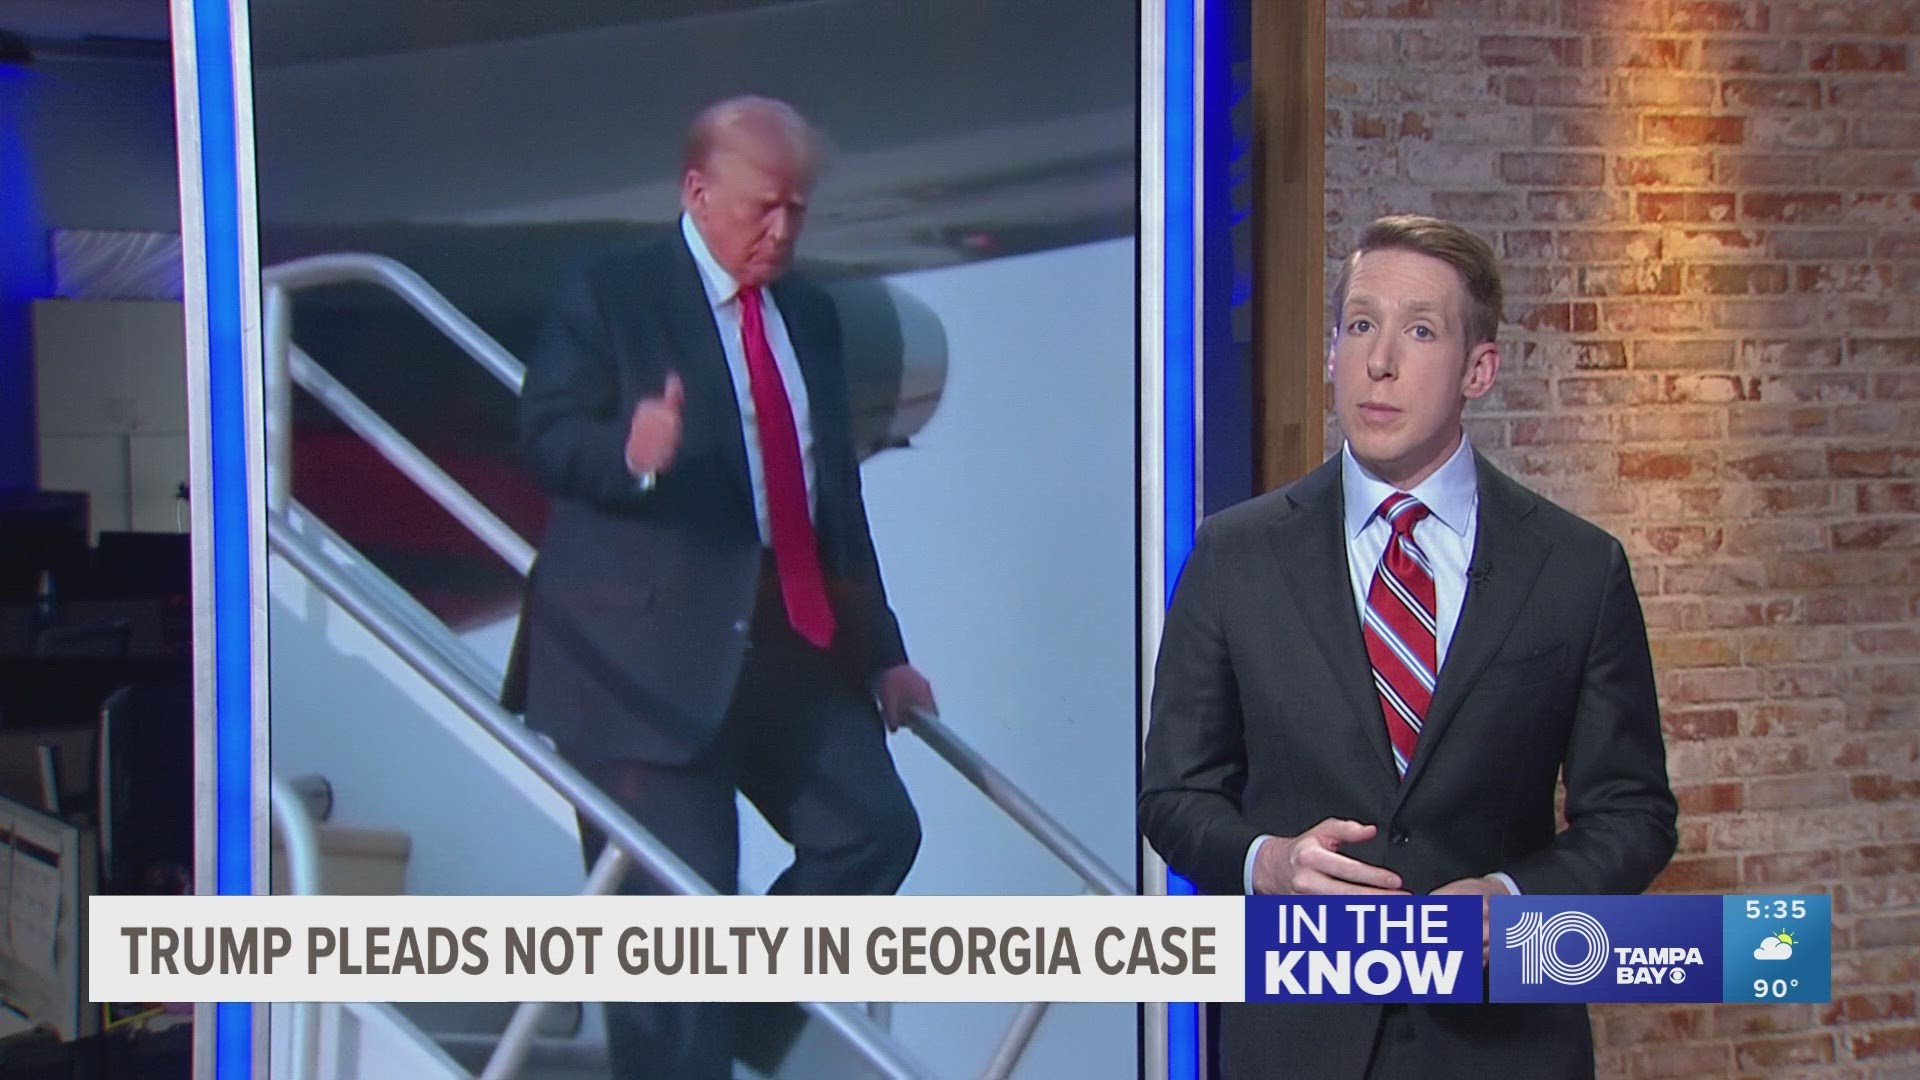 The Georgia case is the latest of four indictments against the former president, and the second on charges related to efforts to overturn the 2020 election.